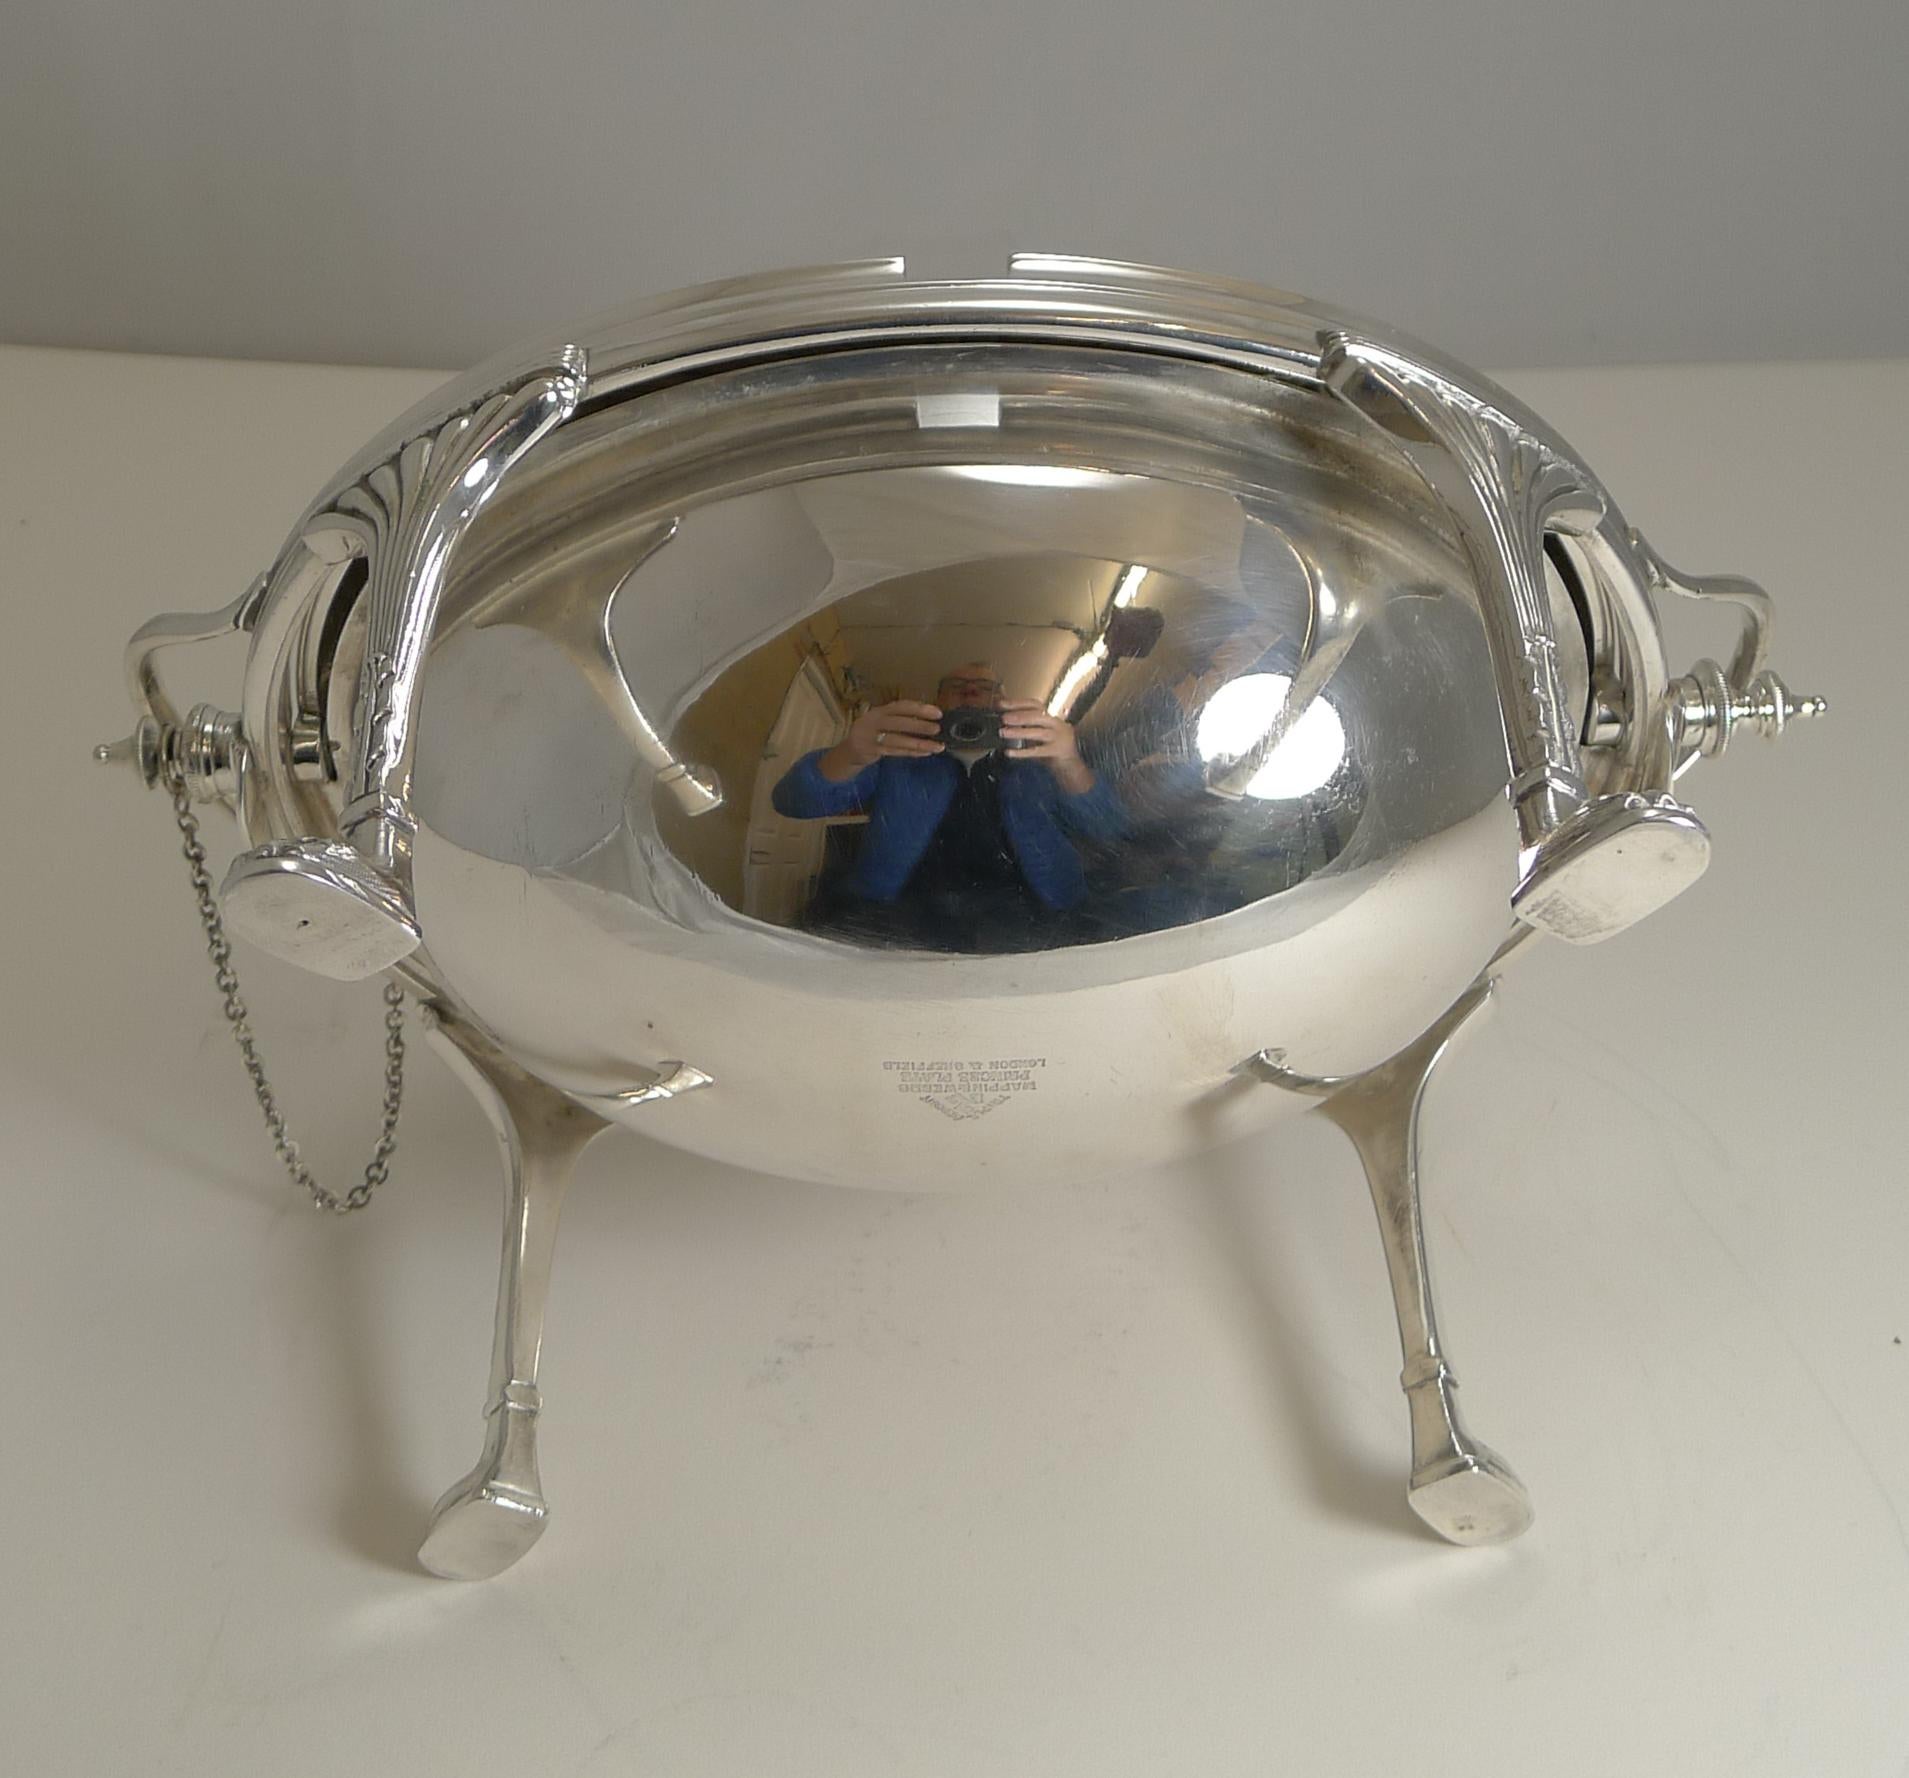 Late Victorian Antique English Silver Plated Revolving Breakfast / Serving Dish, Mappin & Webb